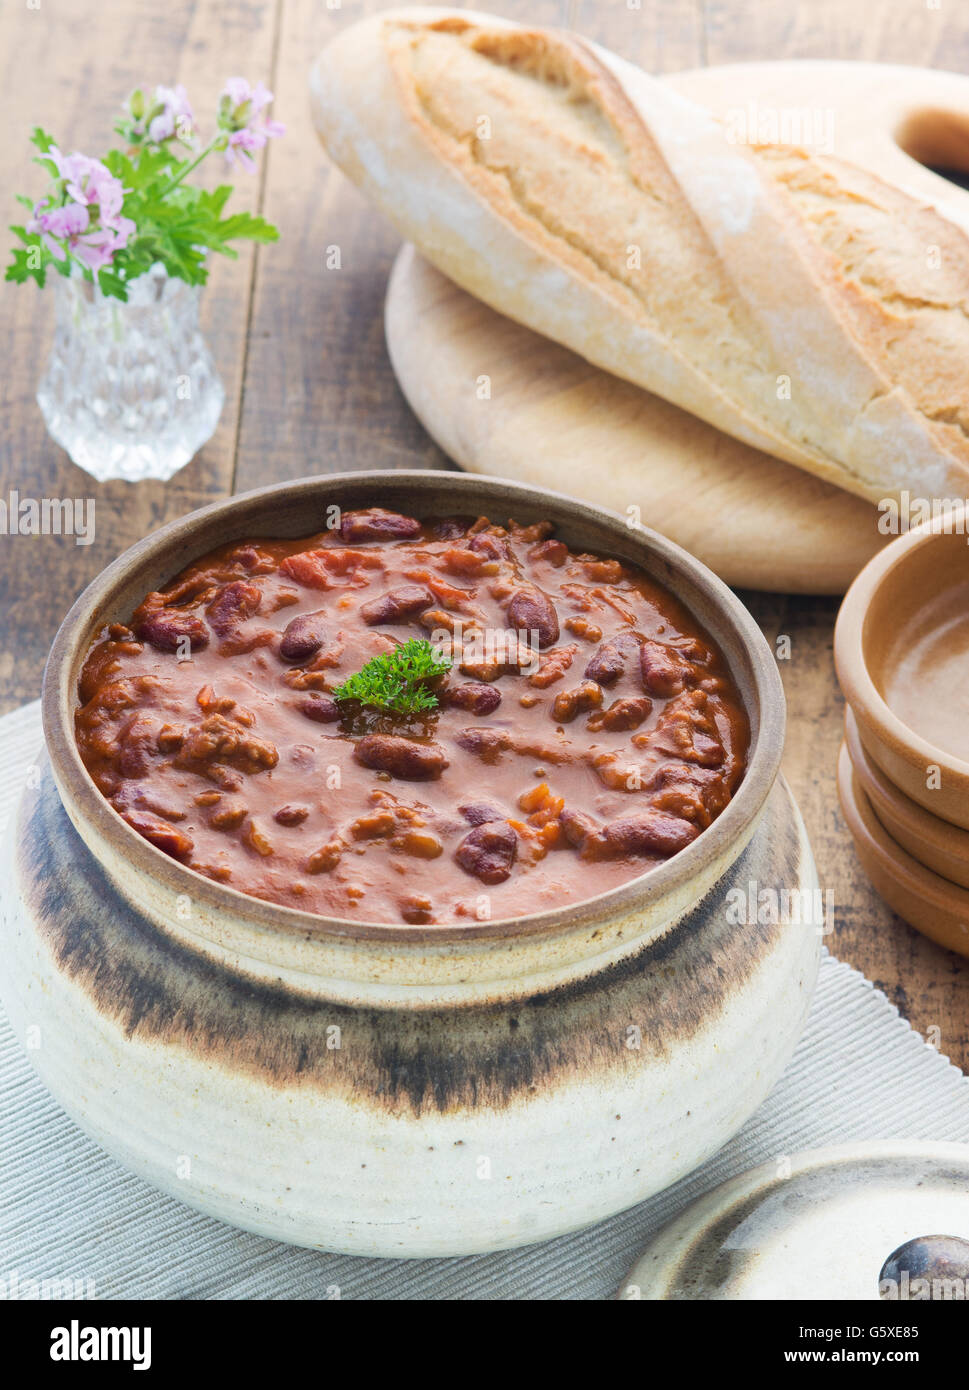 Top view of chilli con cane meal ,selective focus shot in a wooden table in a place setting with bread and plates Stock Photo